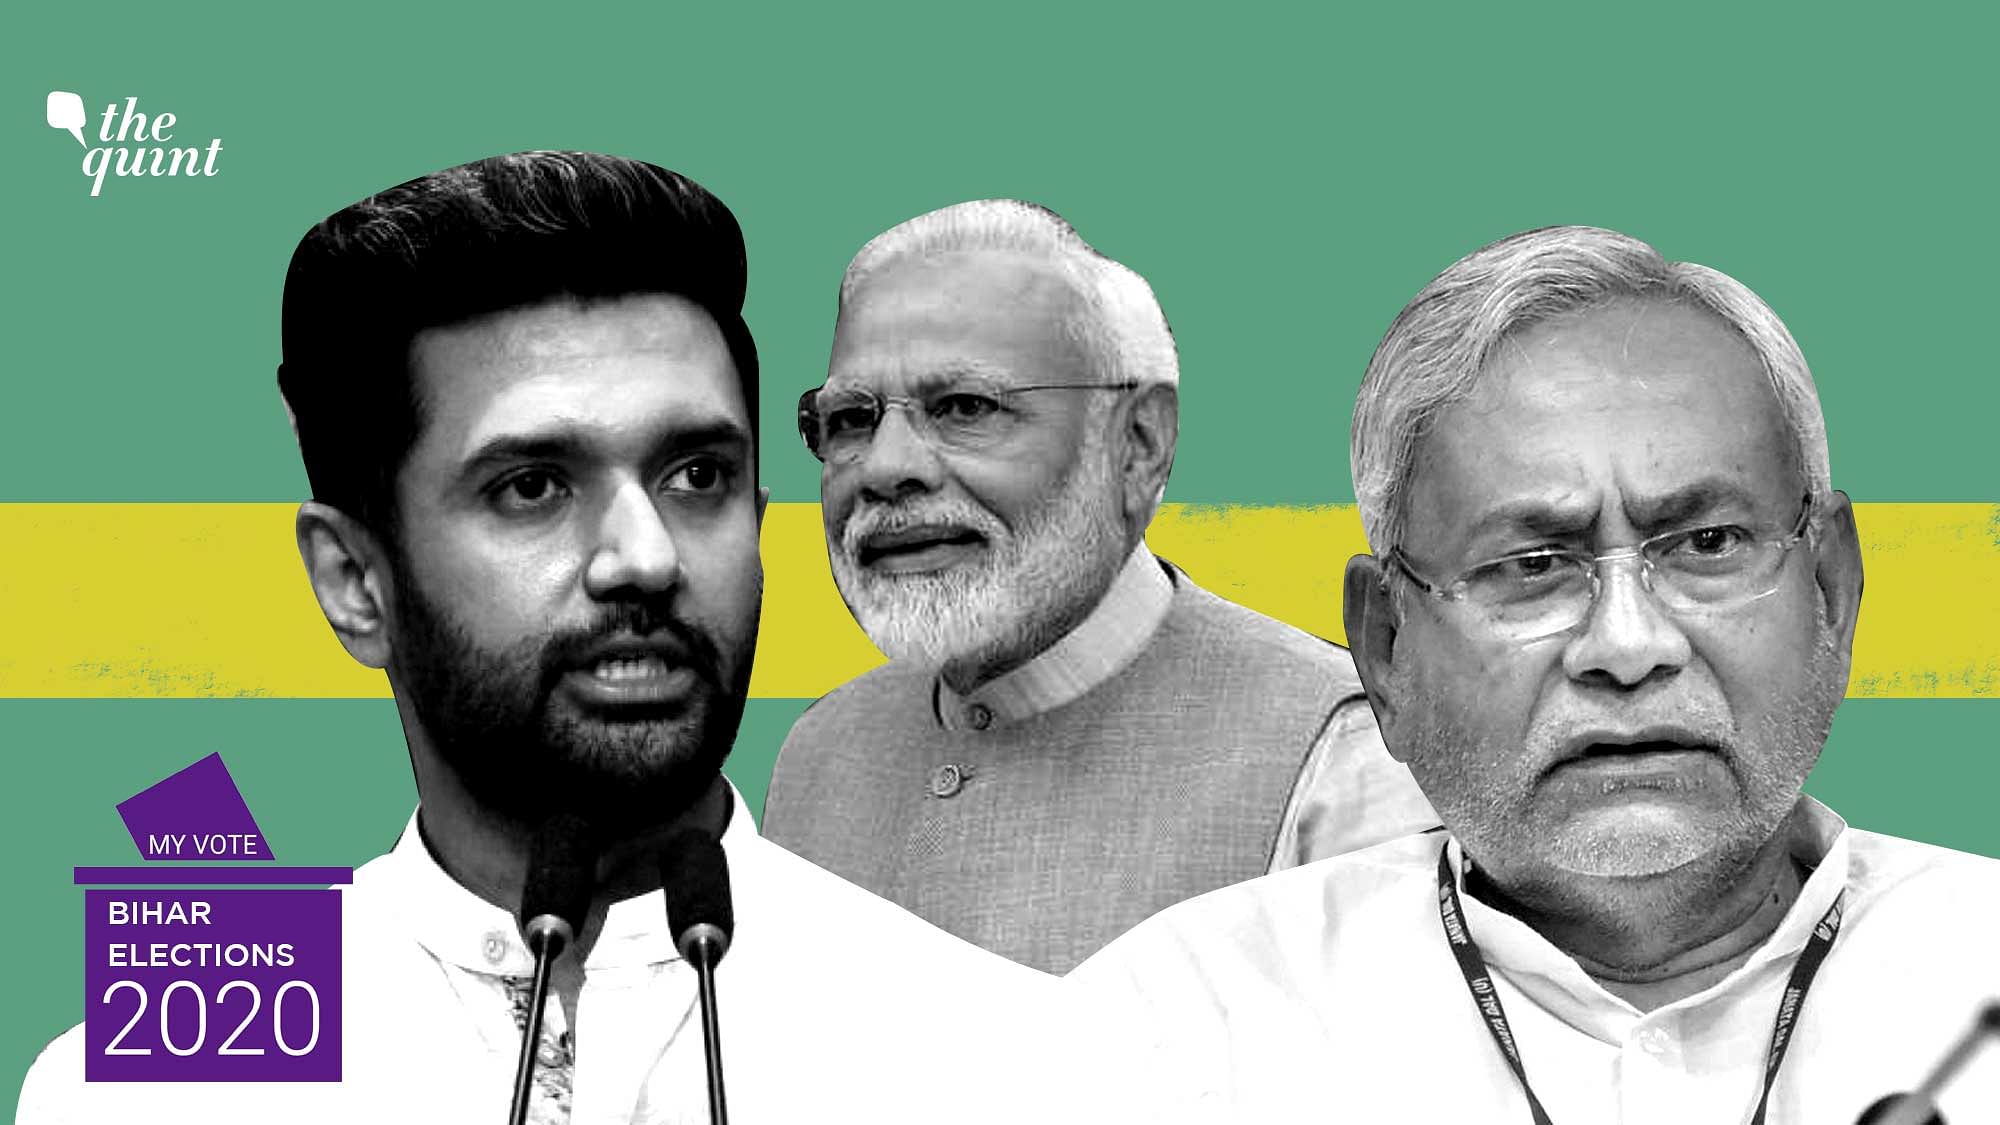 Even though BJP and JDU are claiming that “All-is-Well”, a seat-sharing complication between BJP-JDU and LJP, in the NDA, remains unresolved.